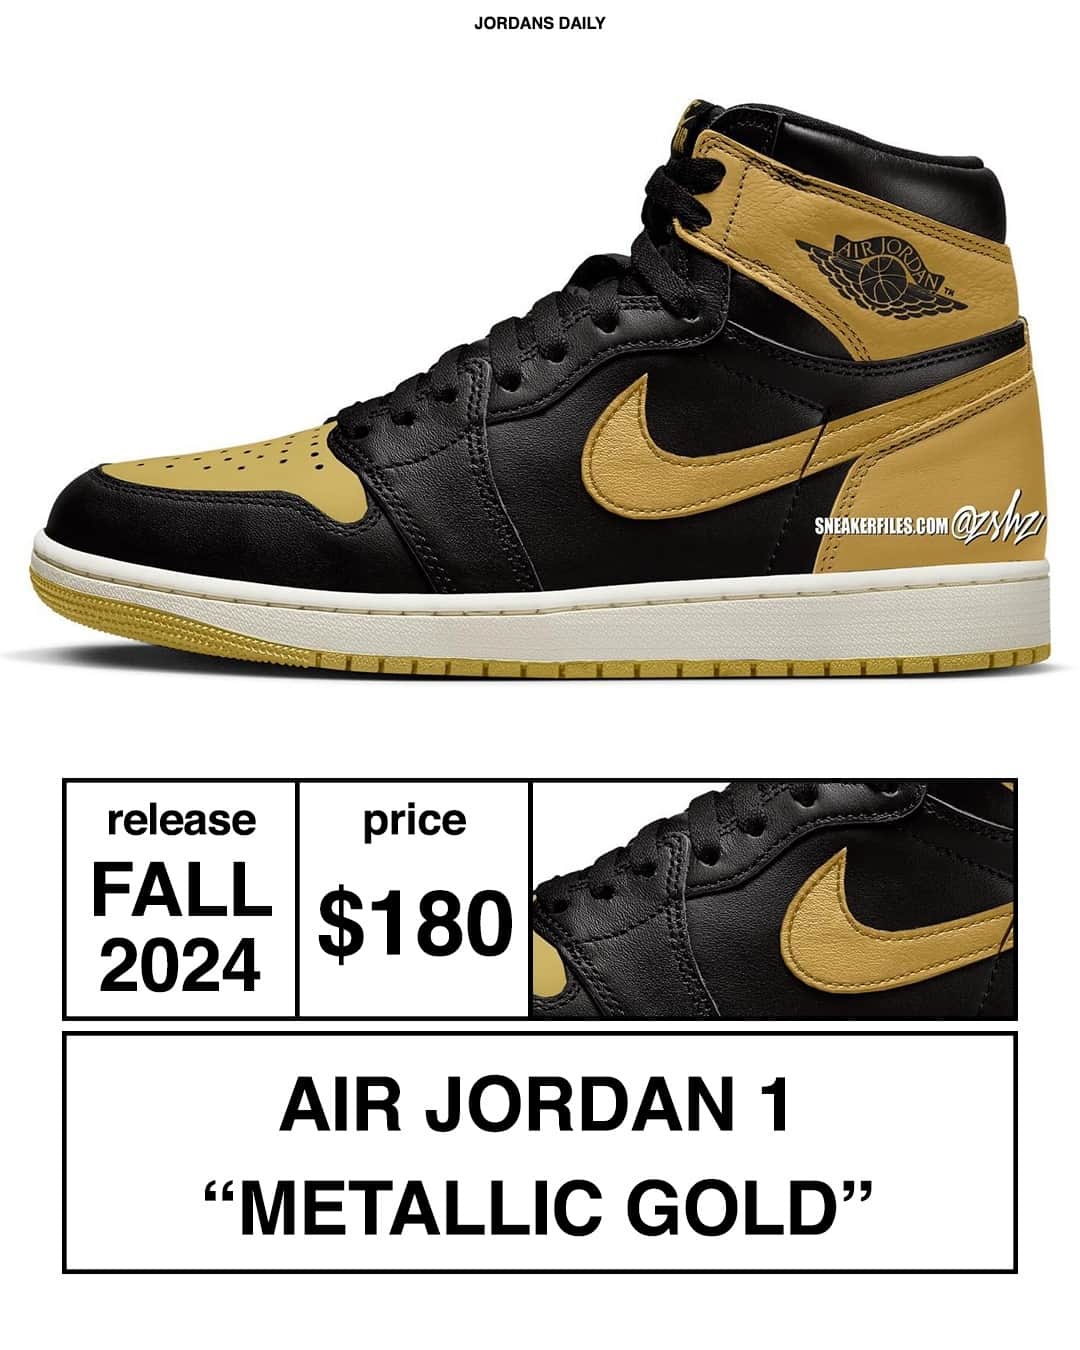 Sneaker News x Jordans Dailyのインスタグラム：「The Air Jordan 1 "Metallic Gold" is slated for a Fall 2024 arrival. For full details, hit the link in the bio!」